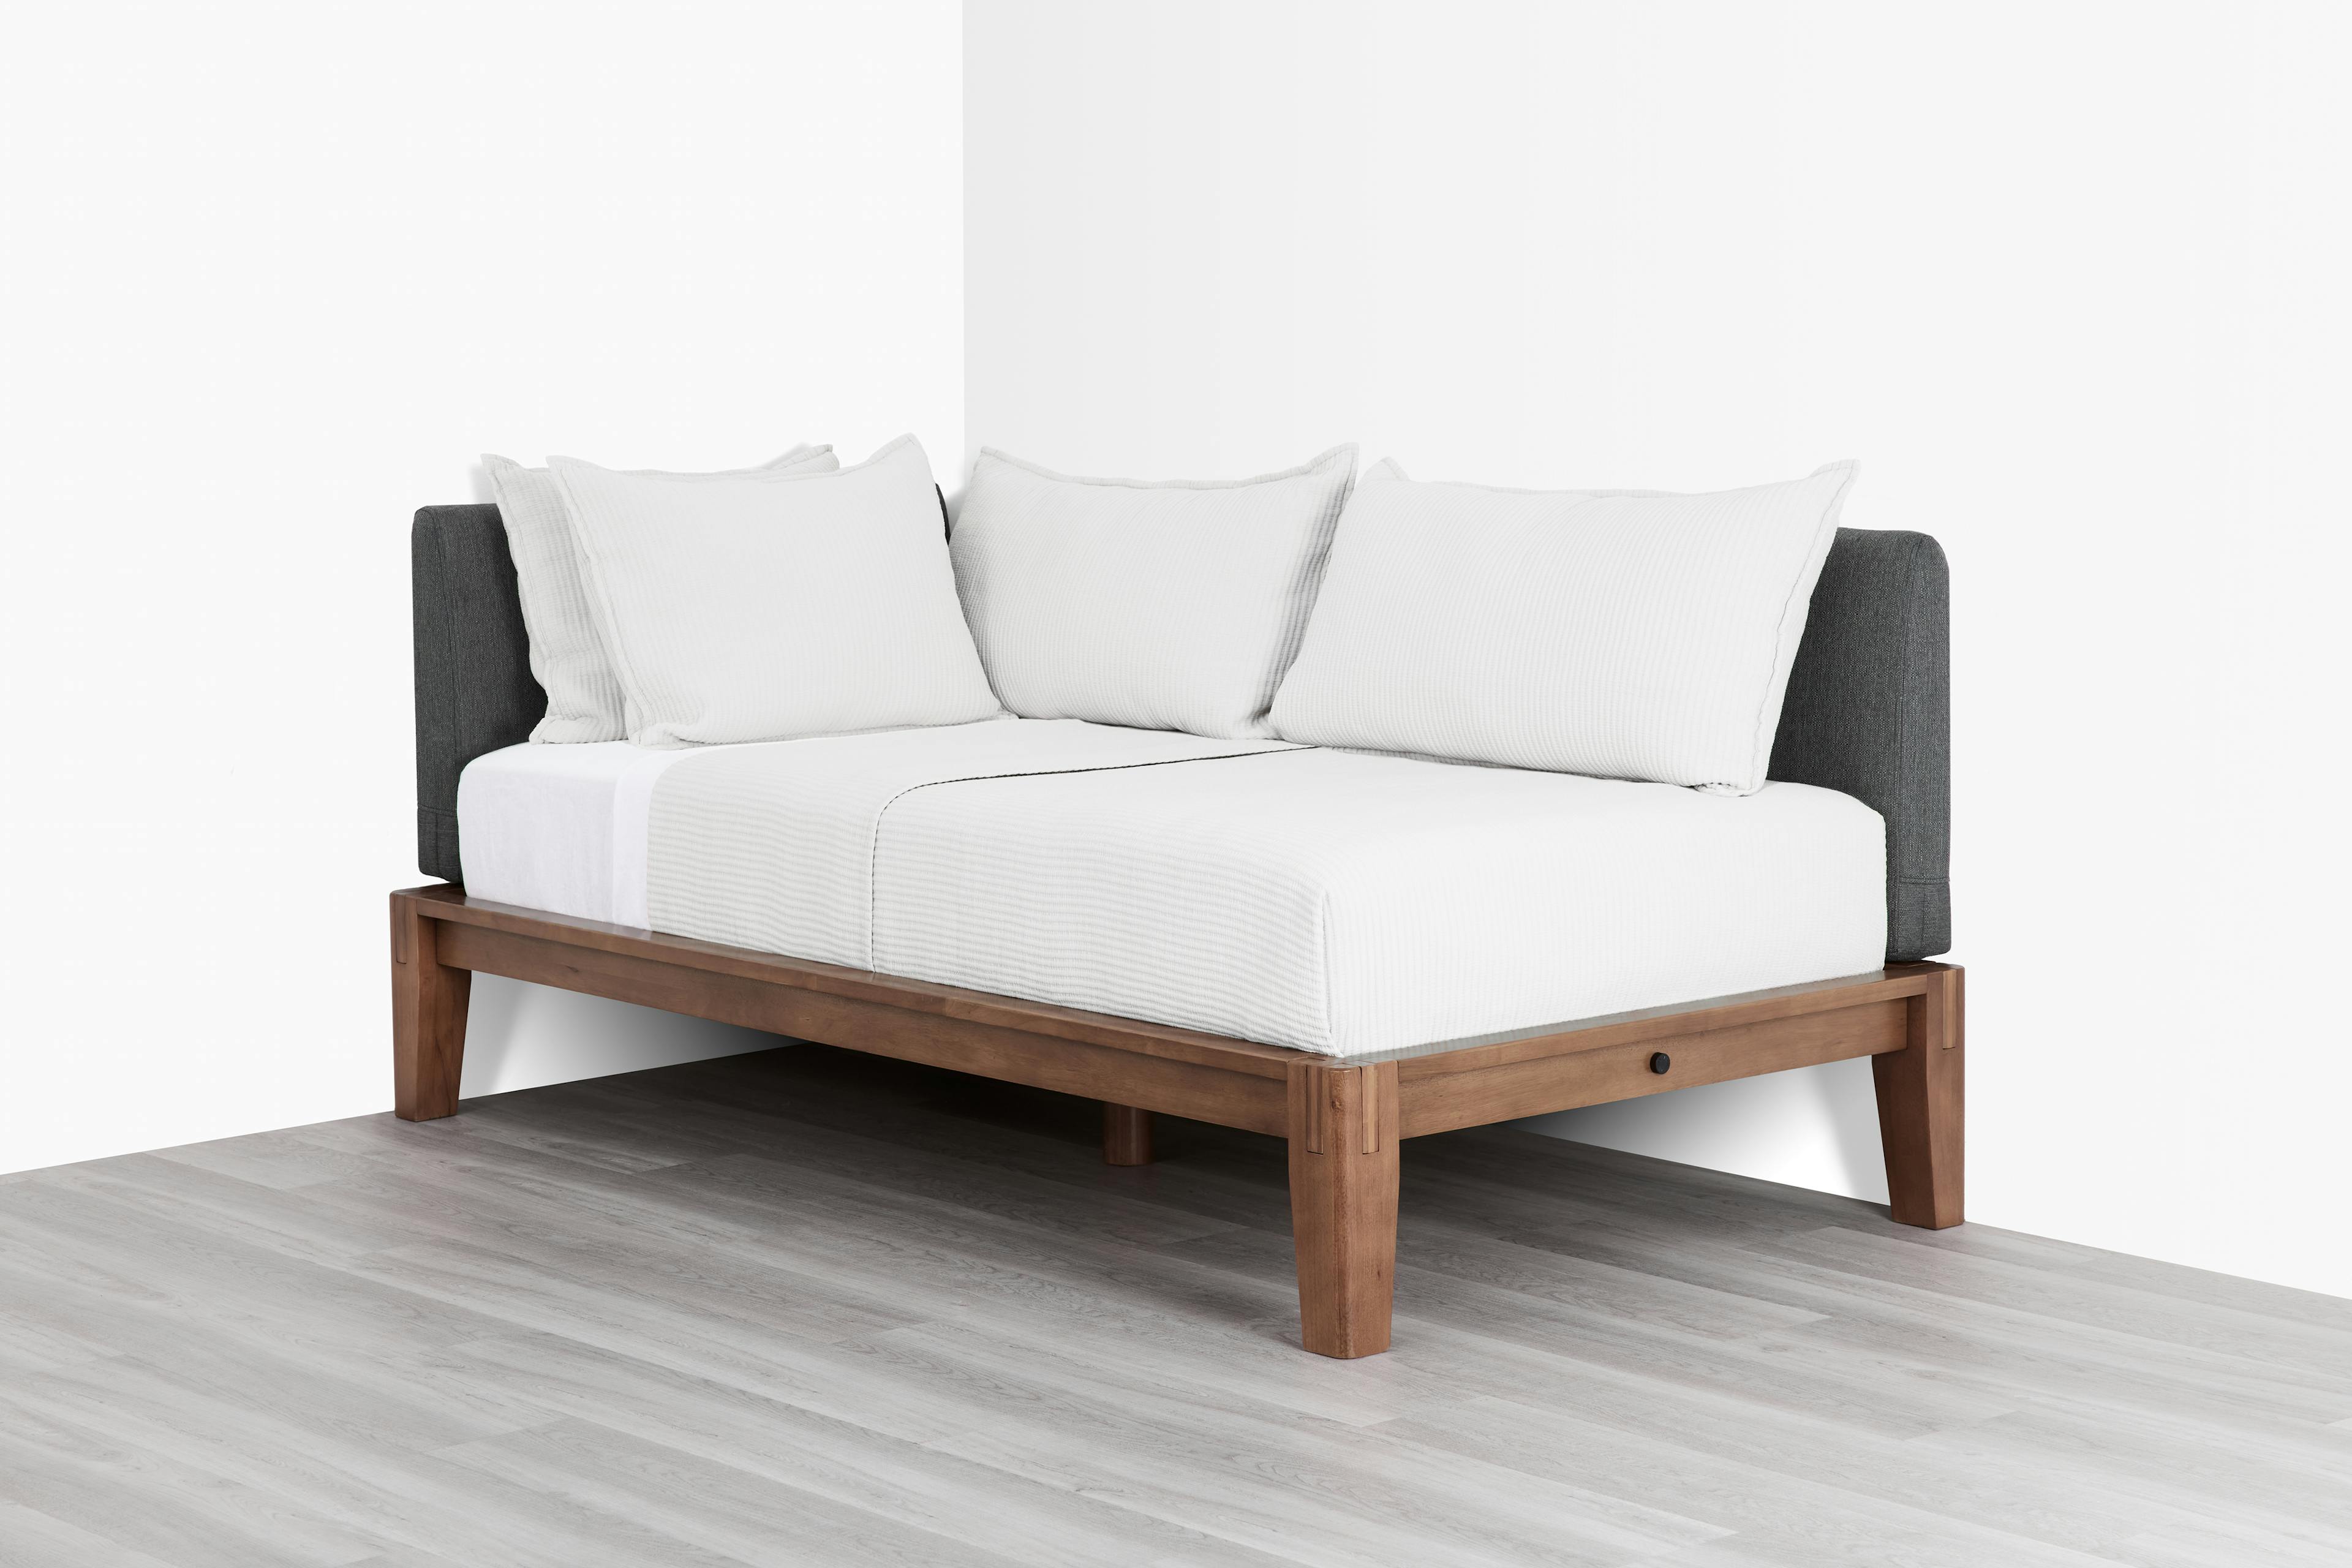 The Daybed in Walnut and Dark Charcoal Color with Pillows